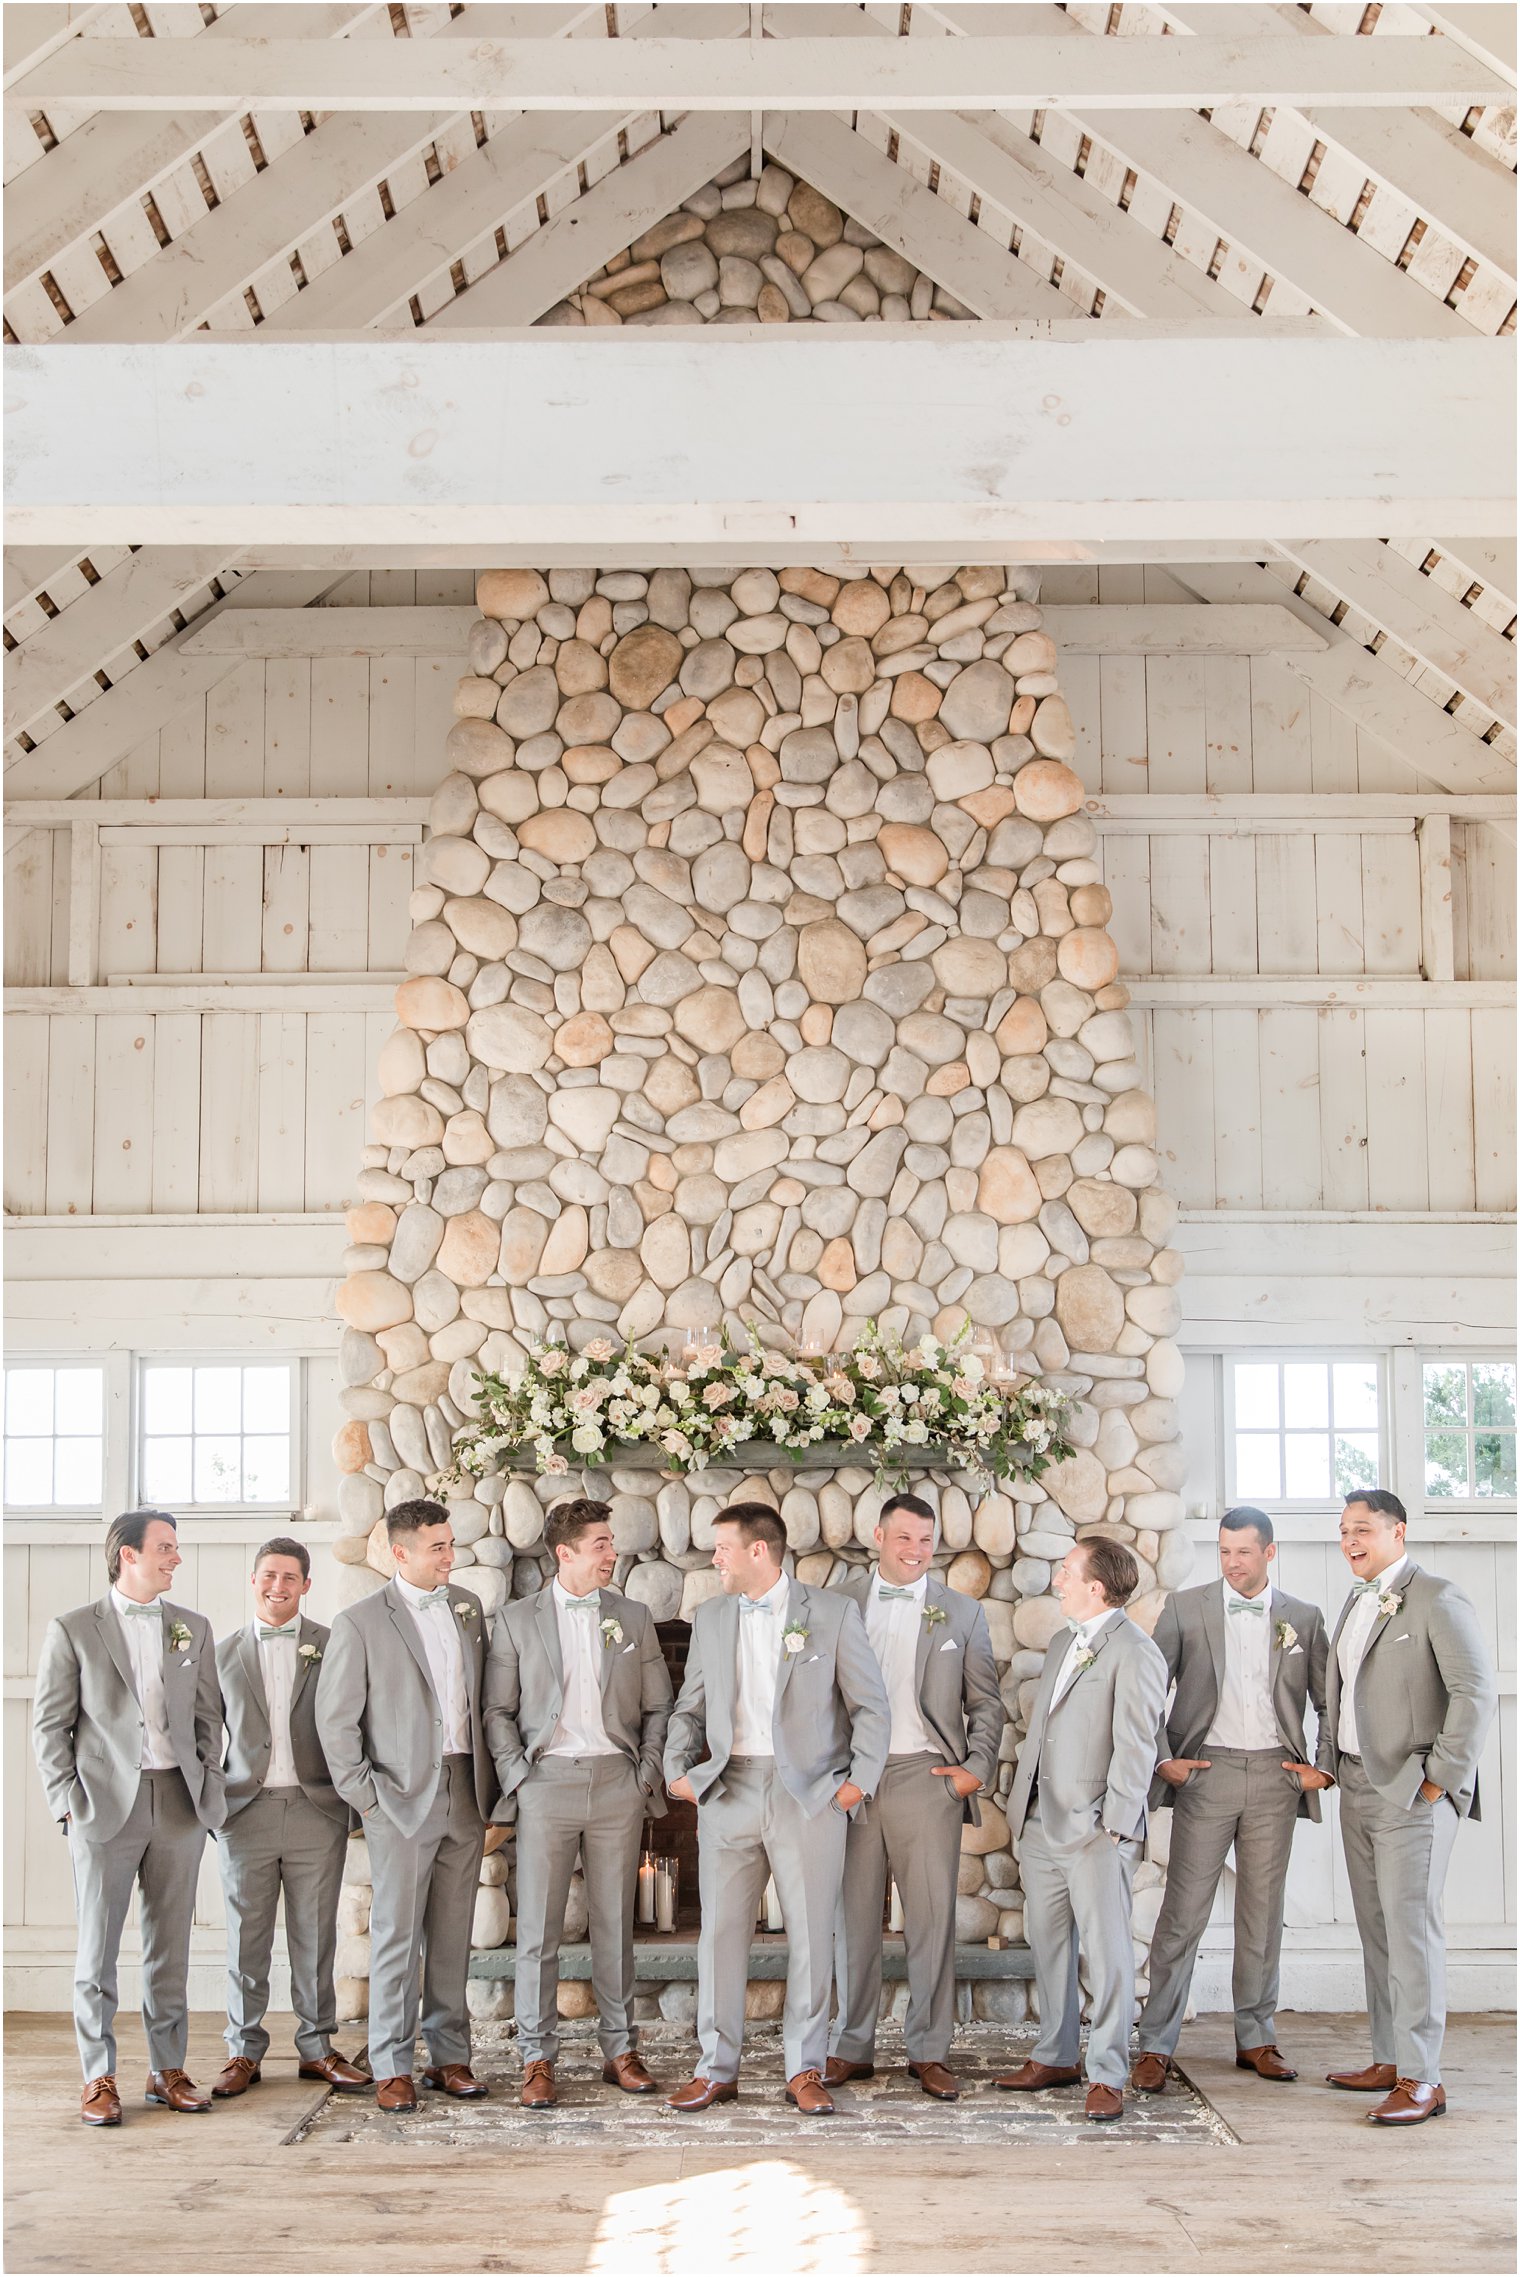 groom stand with groomsmen in grey suits by stone fireplace